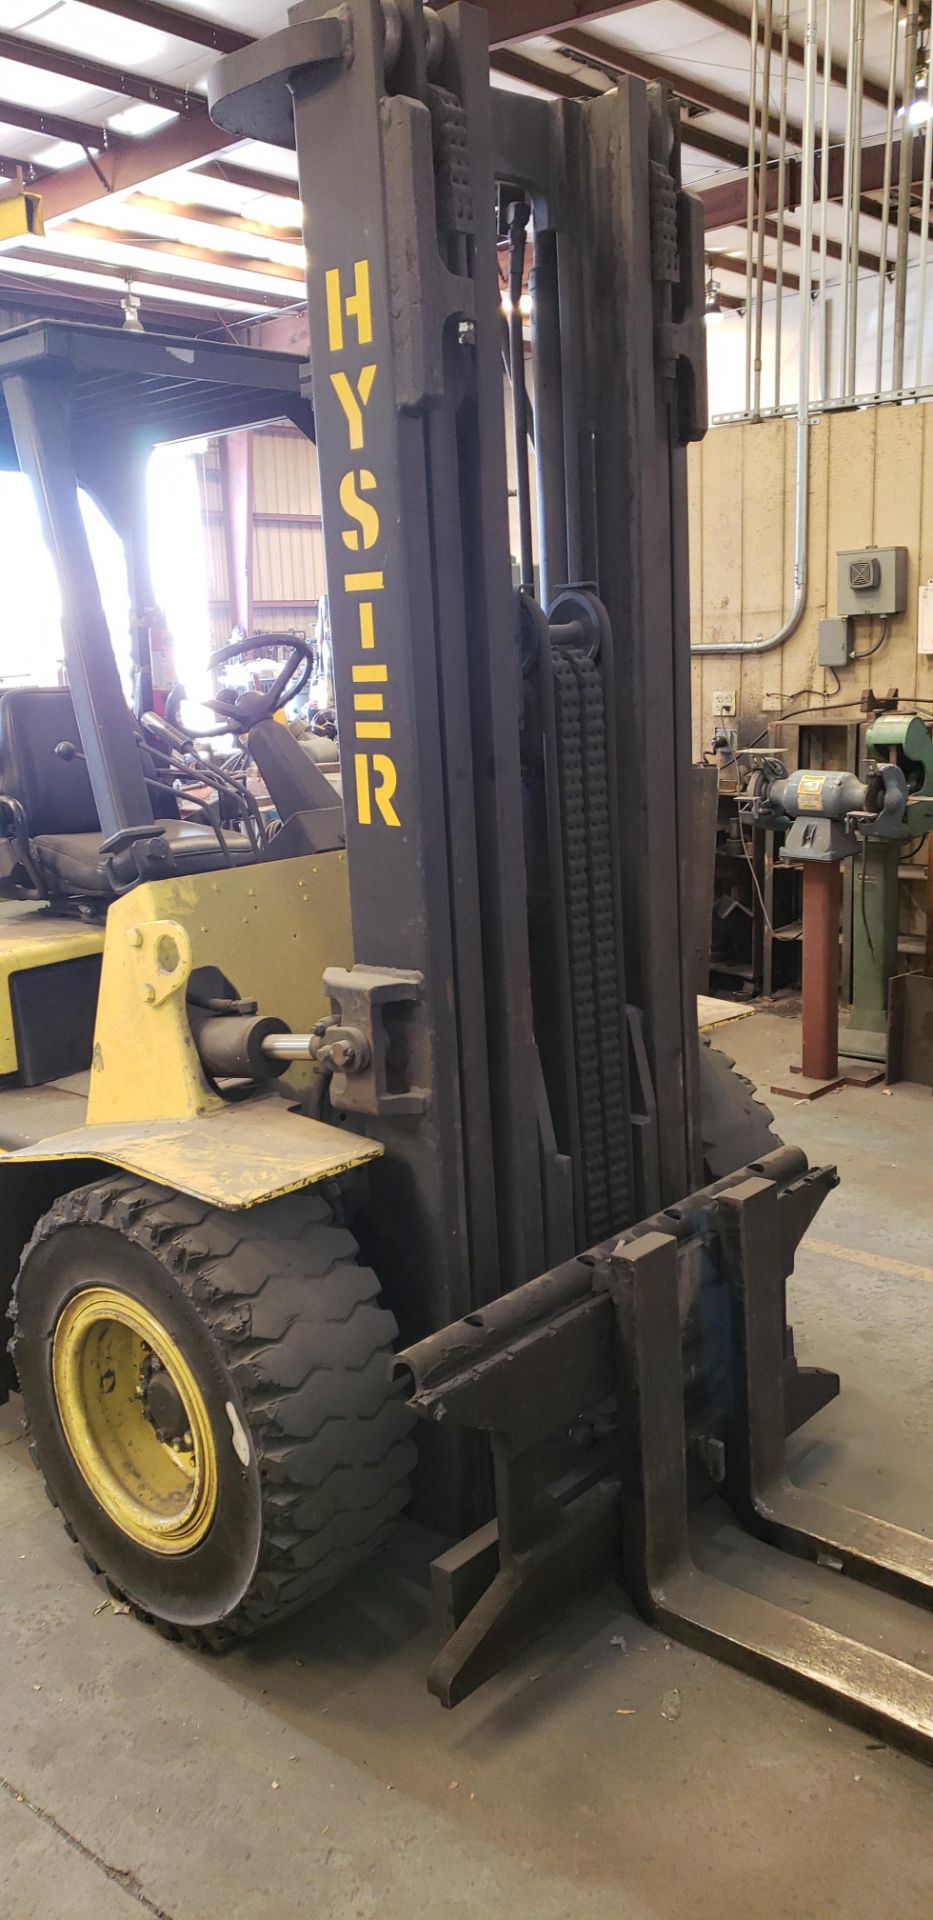 Hyster, Mdl: H100XL Forklift LP, 3-Ton Capacity, 8' x 4' Mast, 2' x 24" x 72 Forks, S/N: F00D06209N, - Image 4 of 7